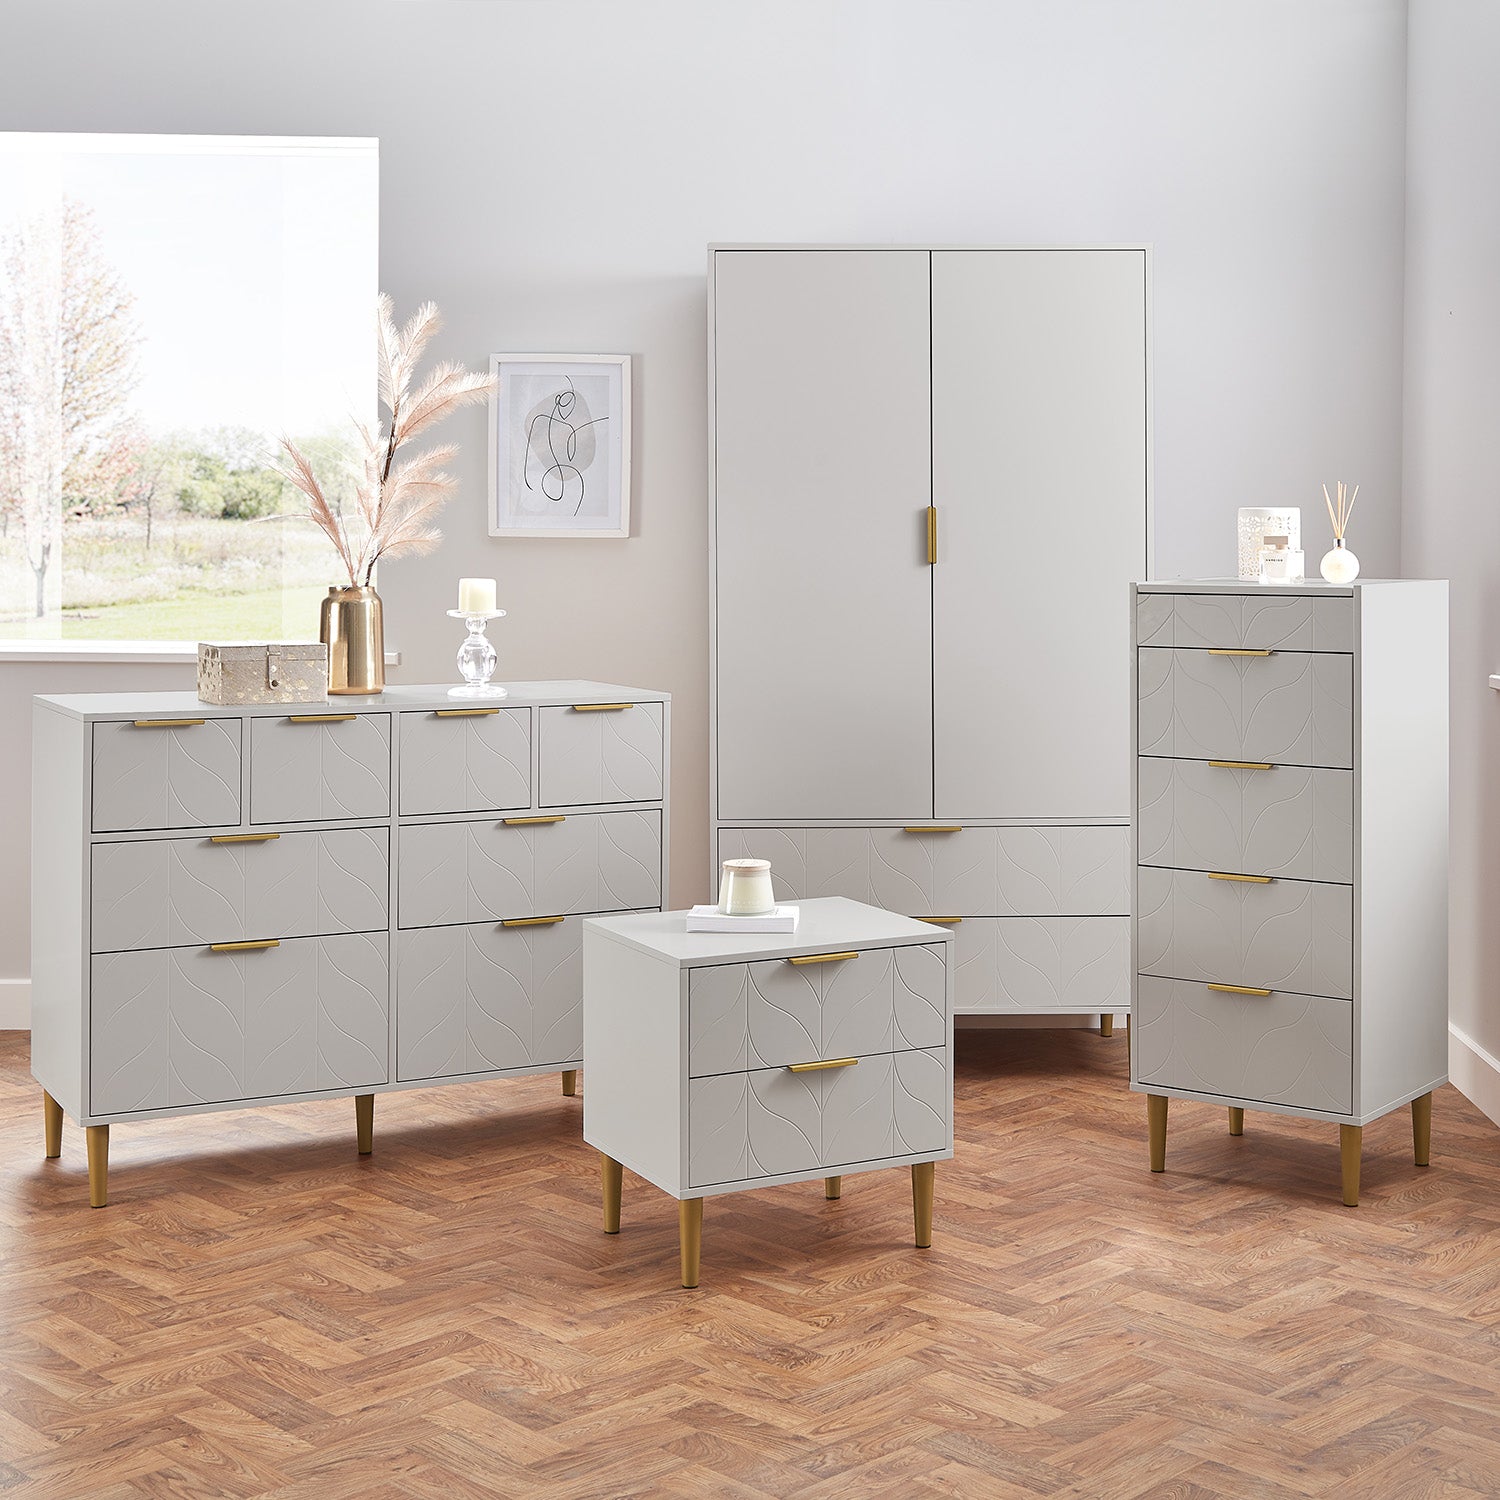 Gloria wardrobe and drawers set - 4 over 4 chest of drawers - grey - Laura James